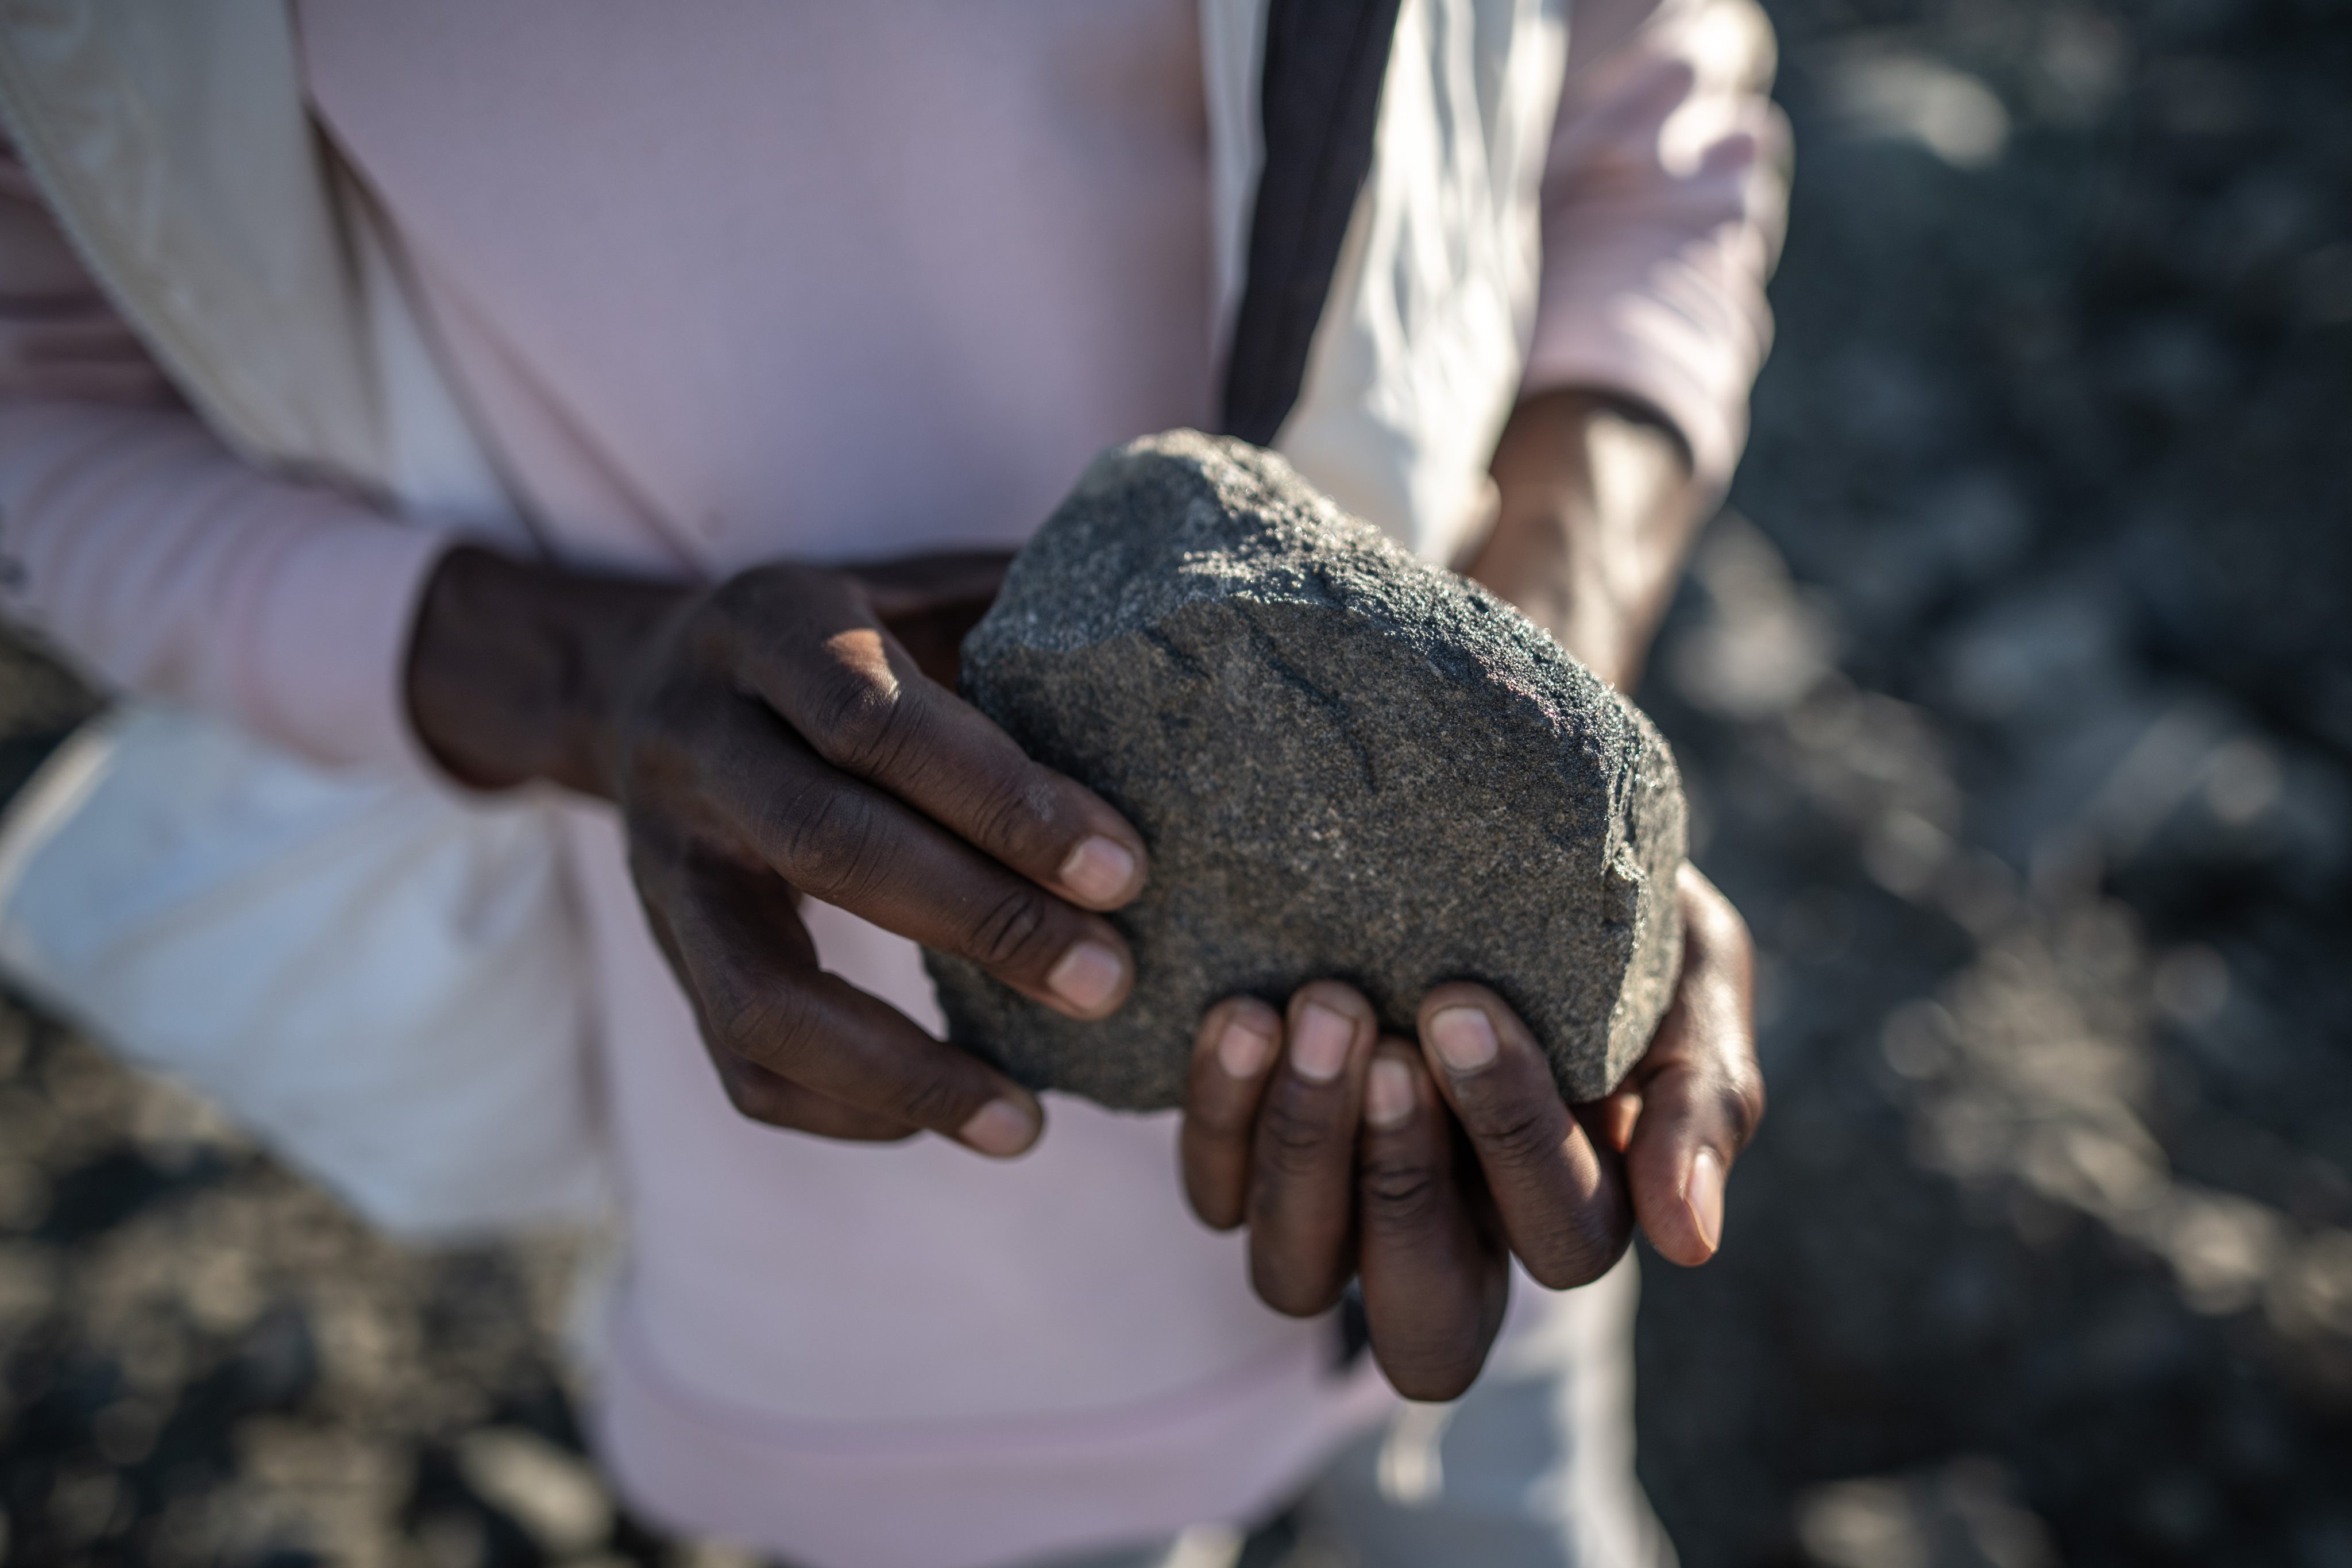 A man holds a piece of chrome-rich rock at an illegal mine in Witrandjie, South Africa. Chinese demand for chromium to make stainless steel is blighting rural communities and scarring the land. Photo: Bloomberg